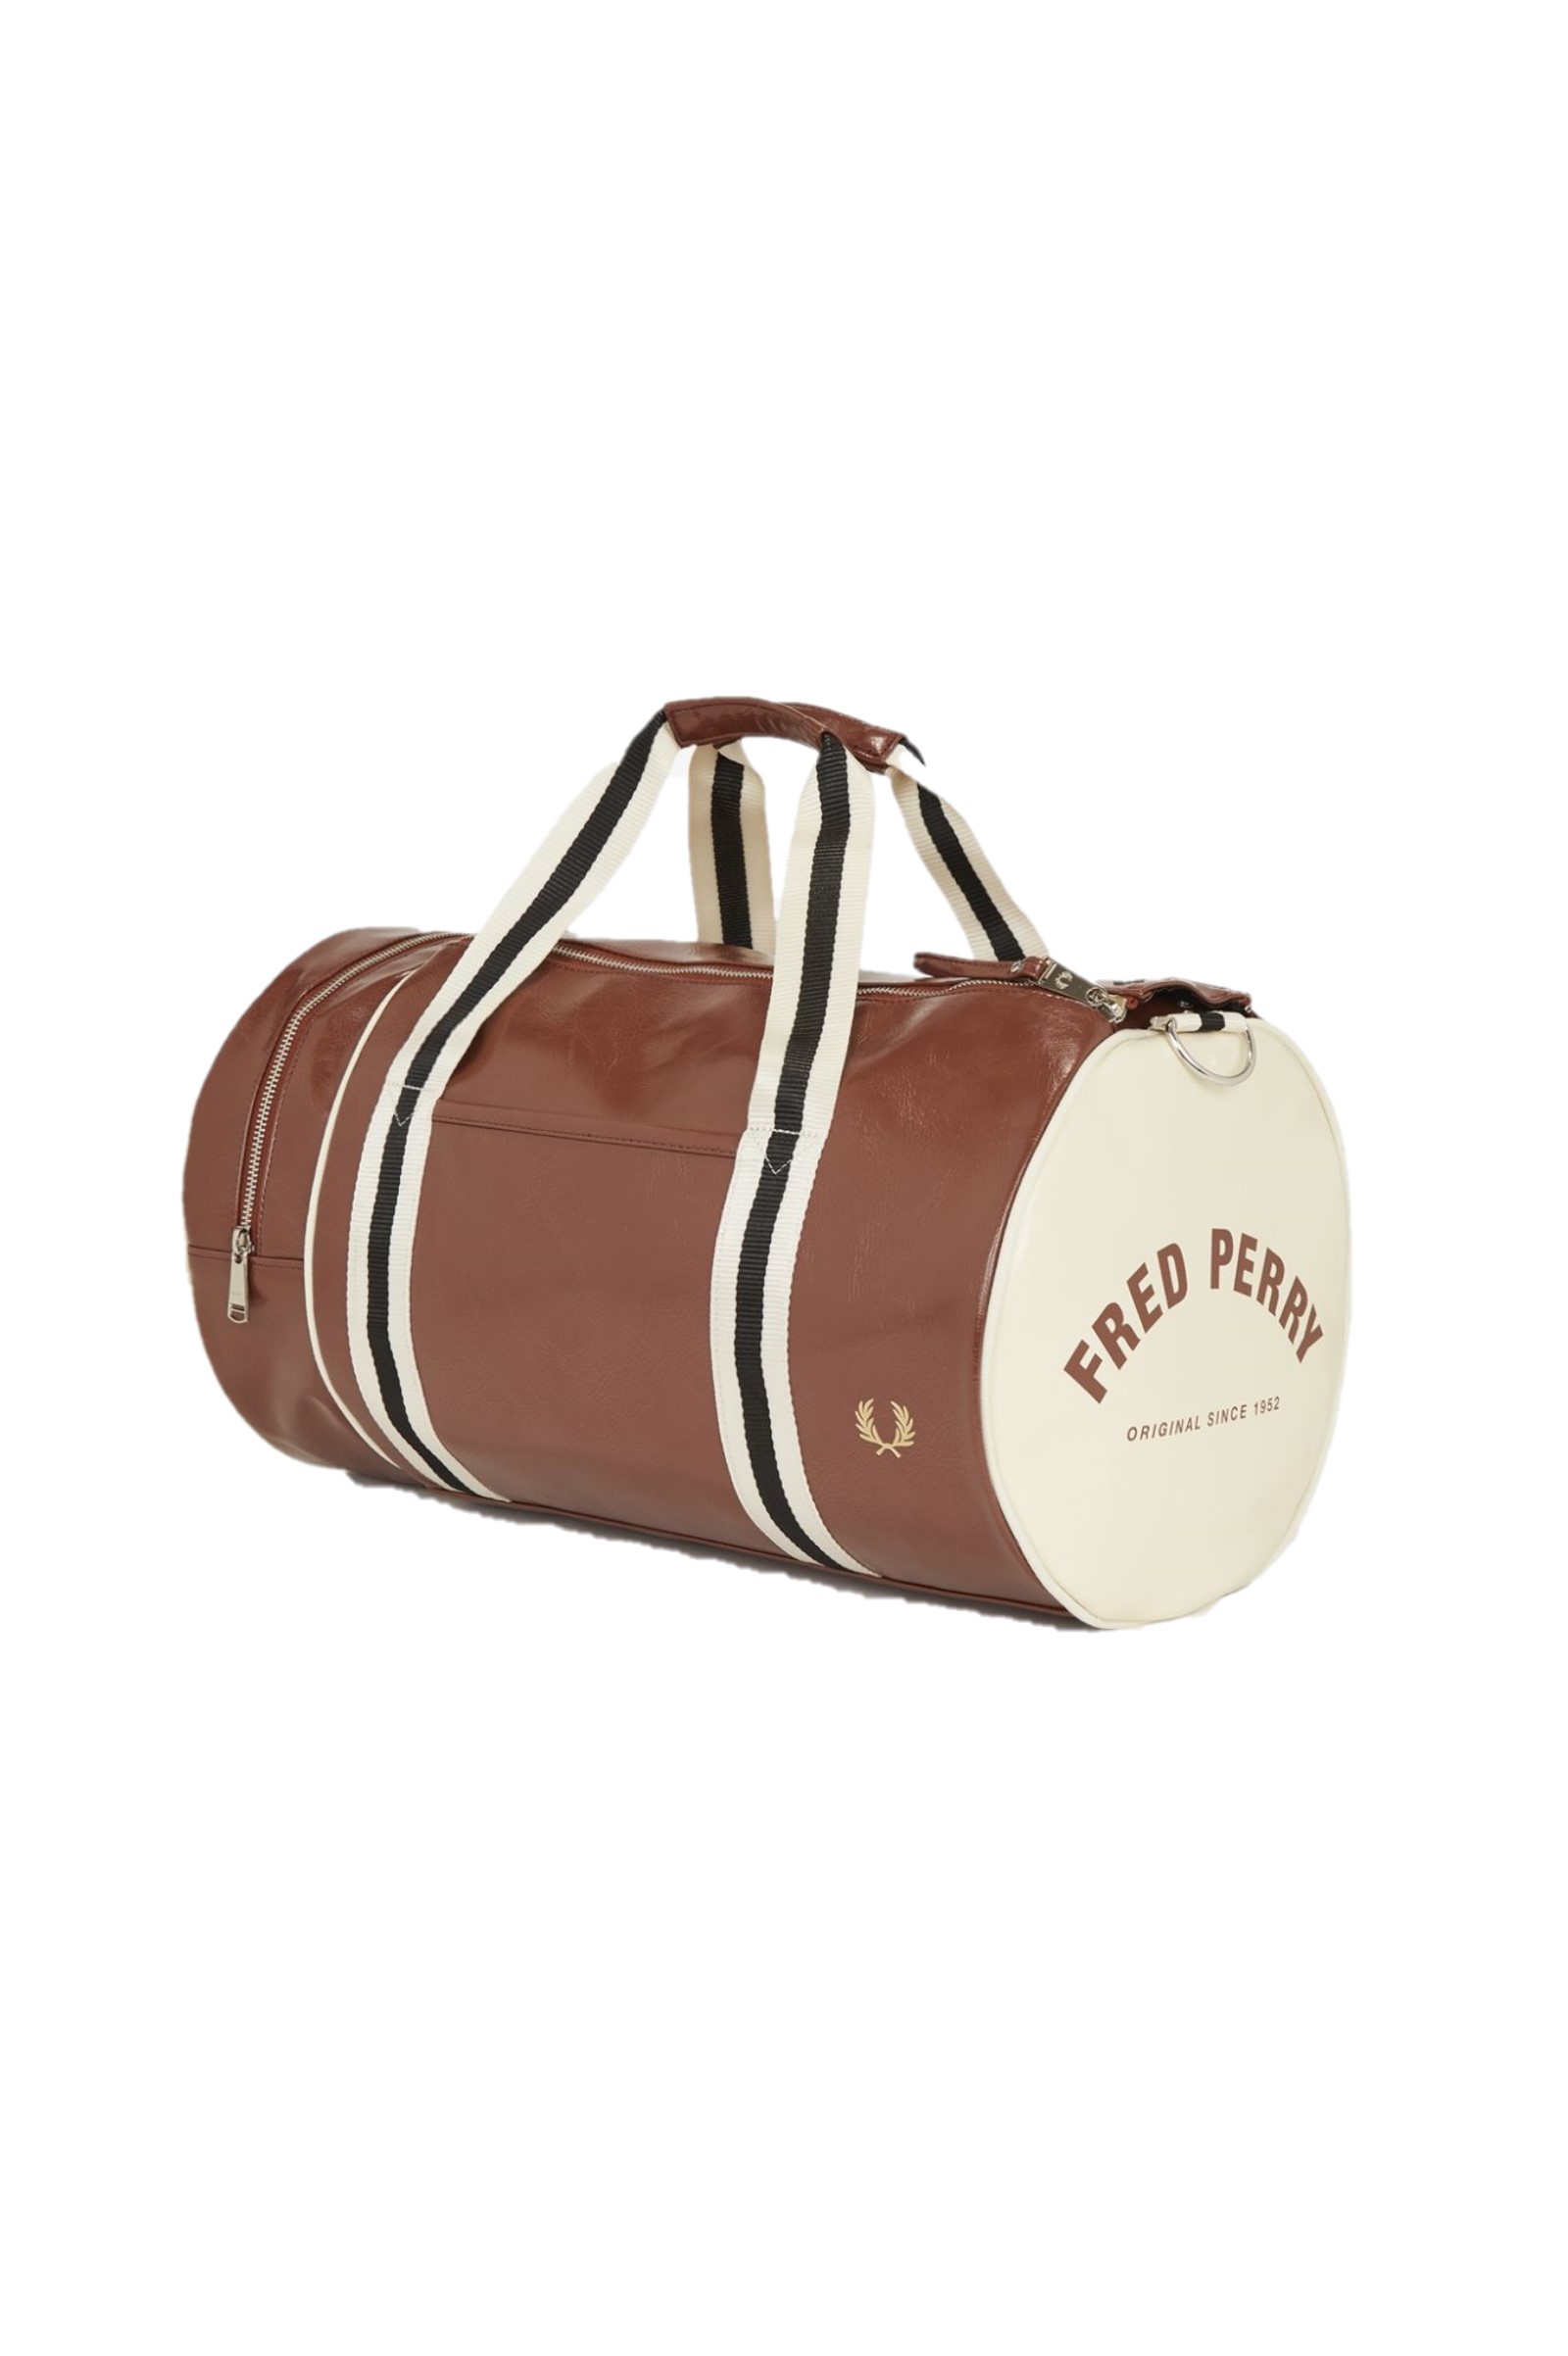 fred-perry-classic-barrel-bag-brown